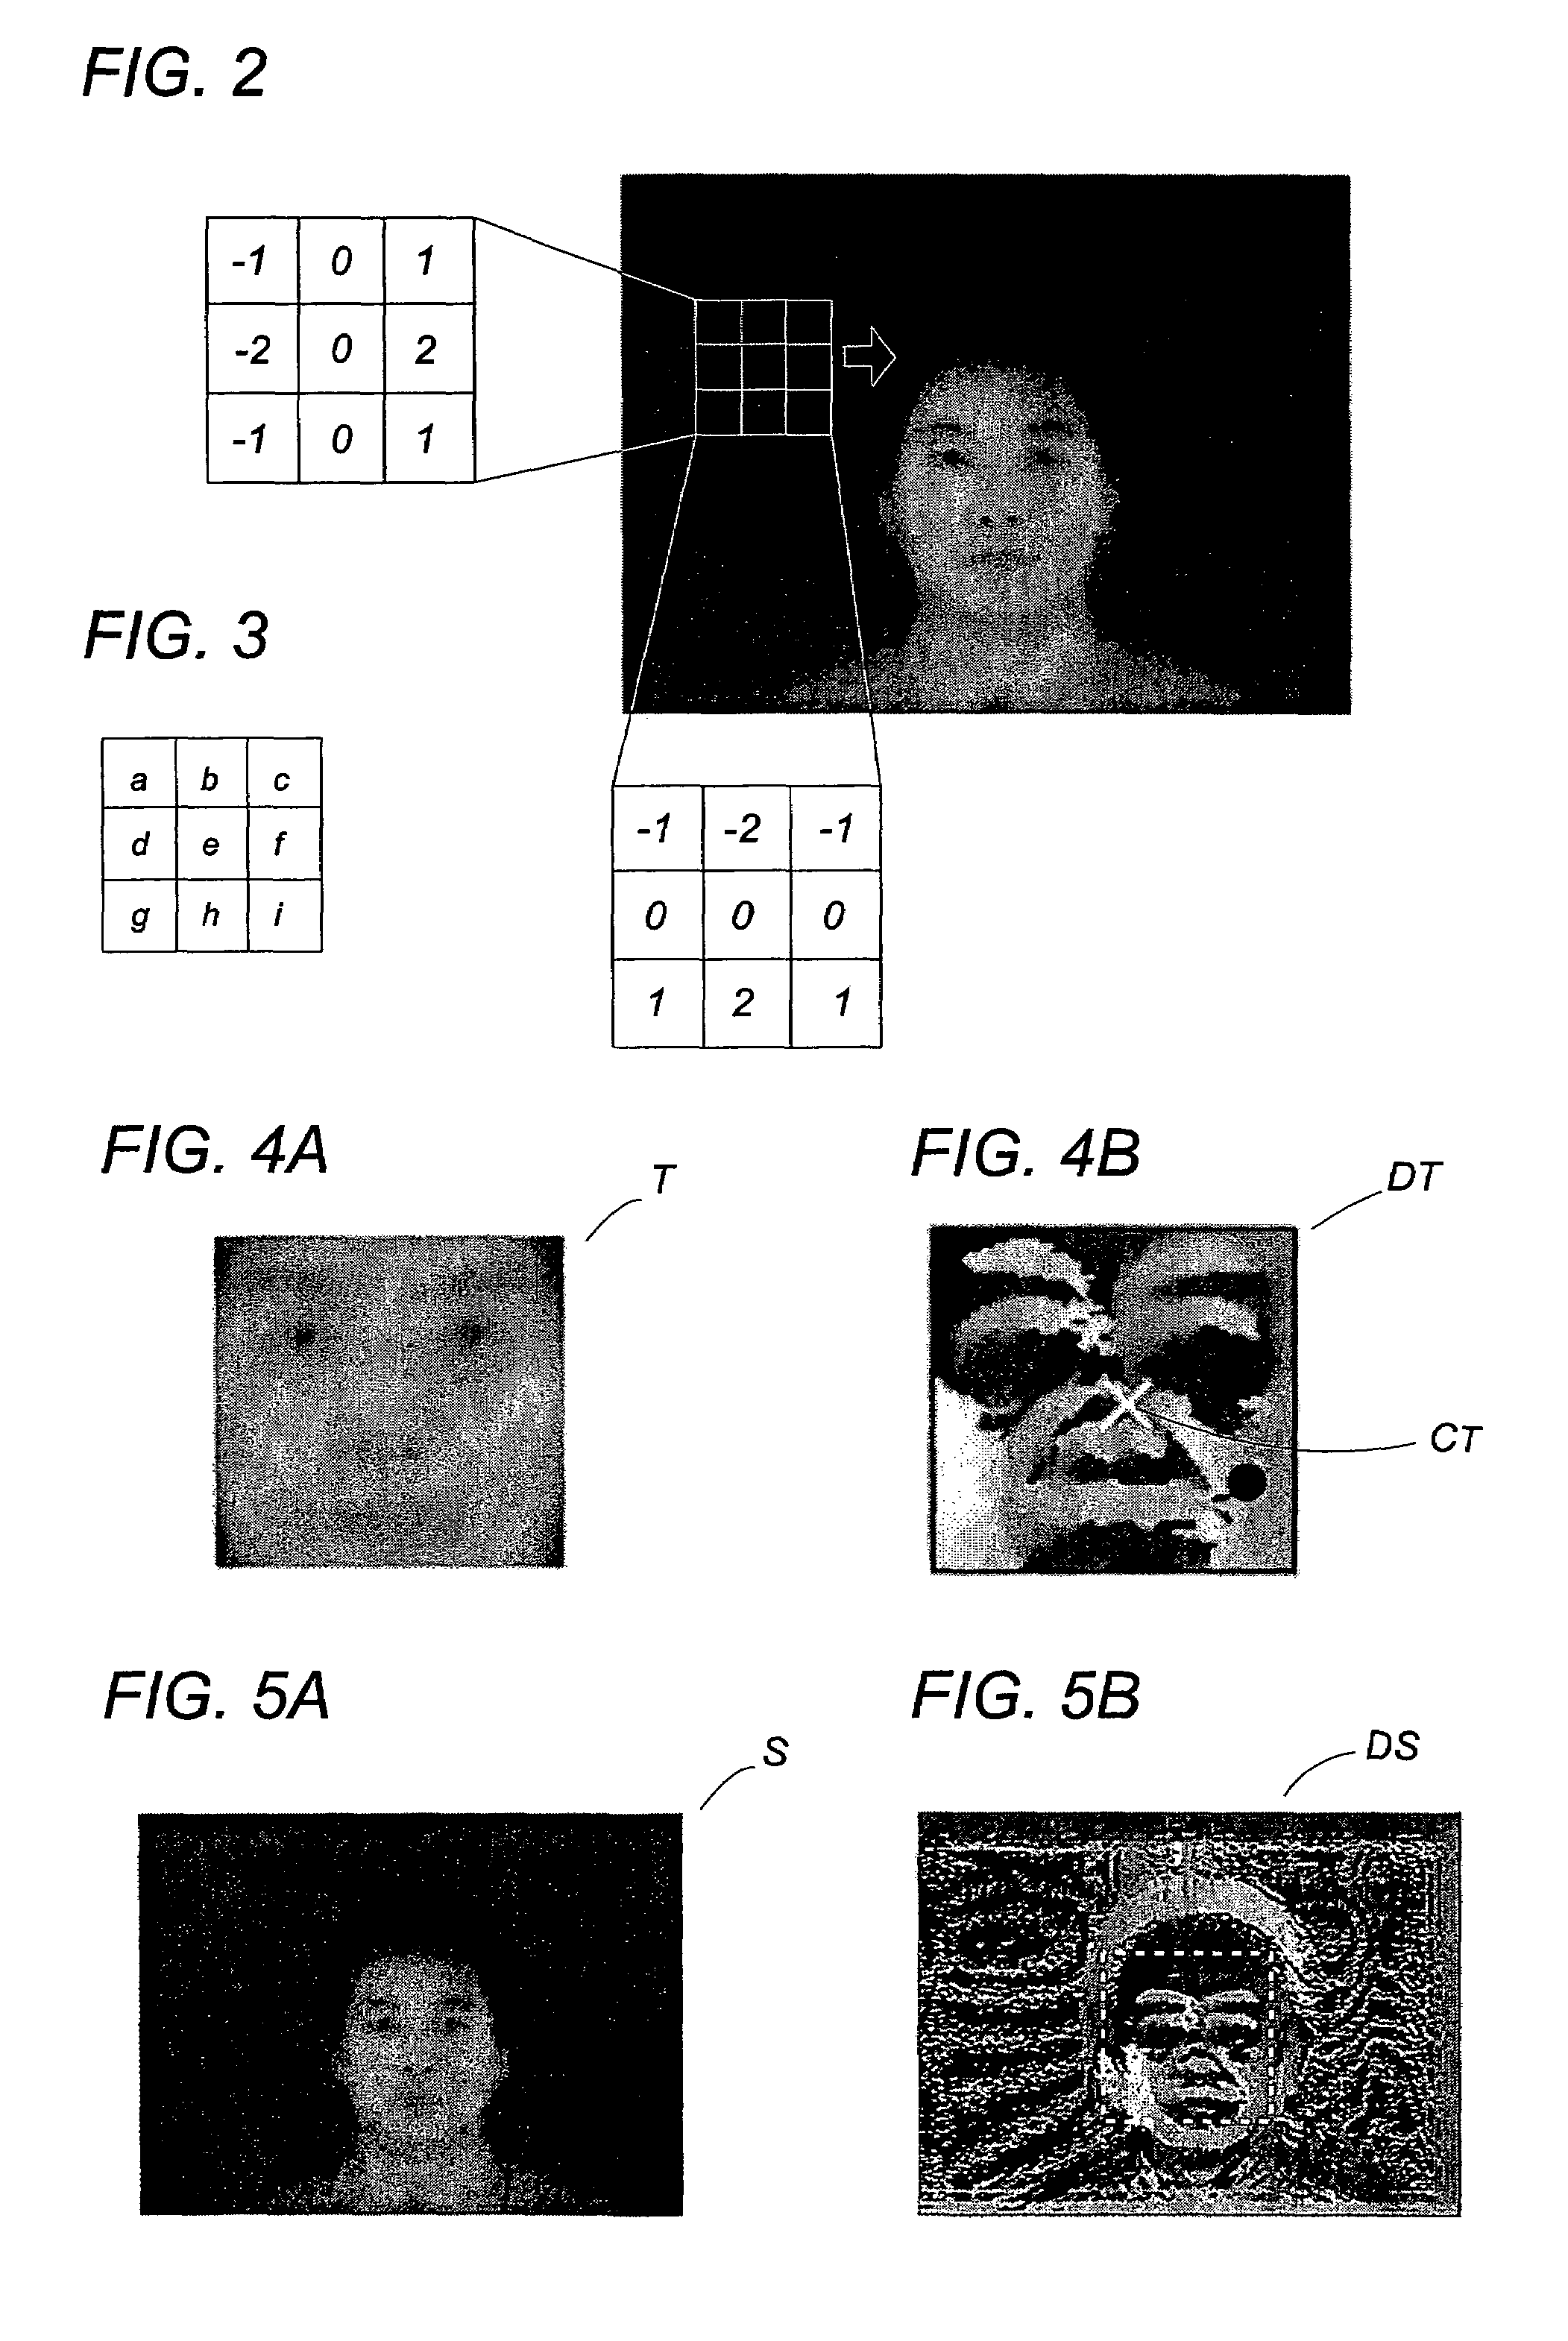 Object recognition system